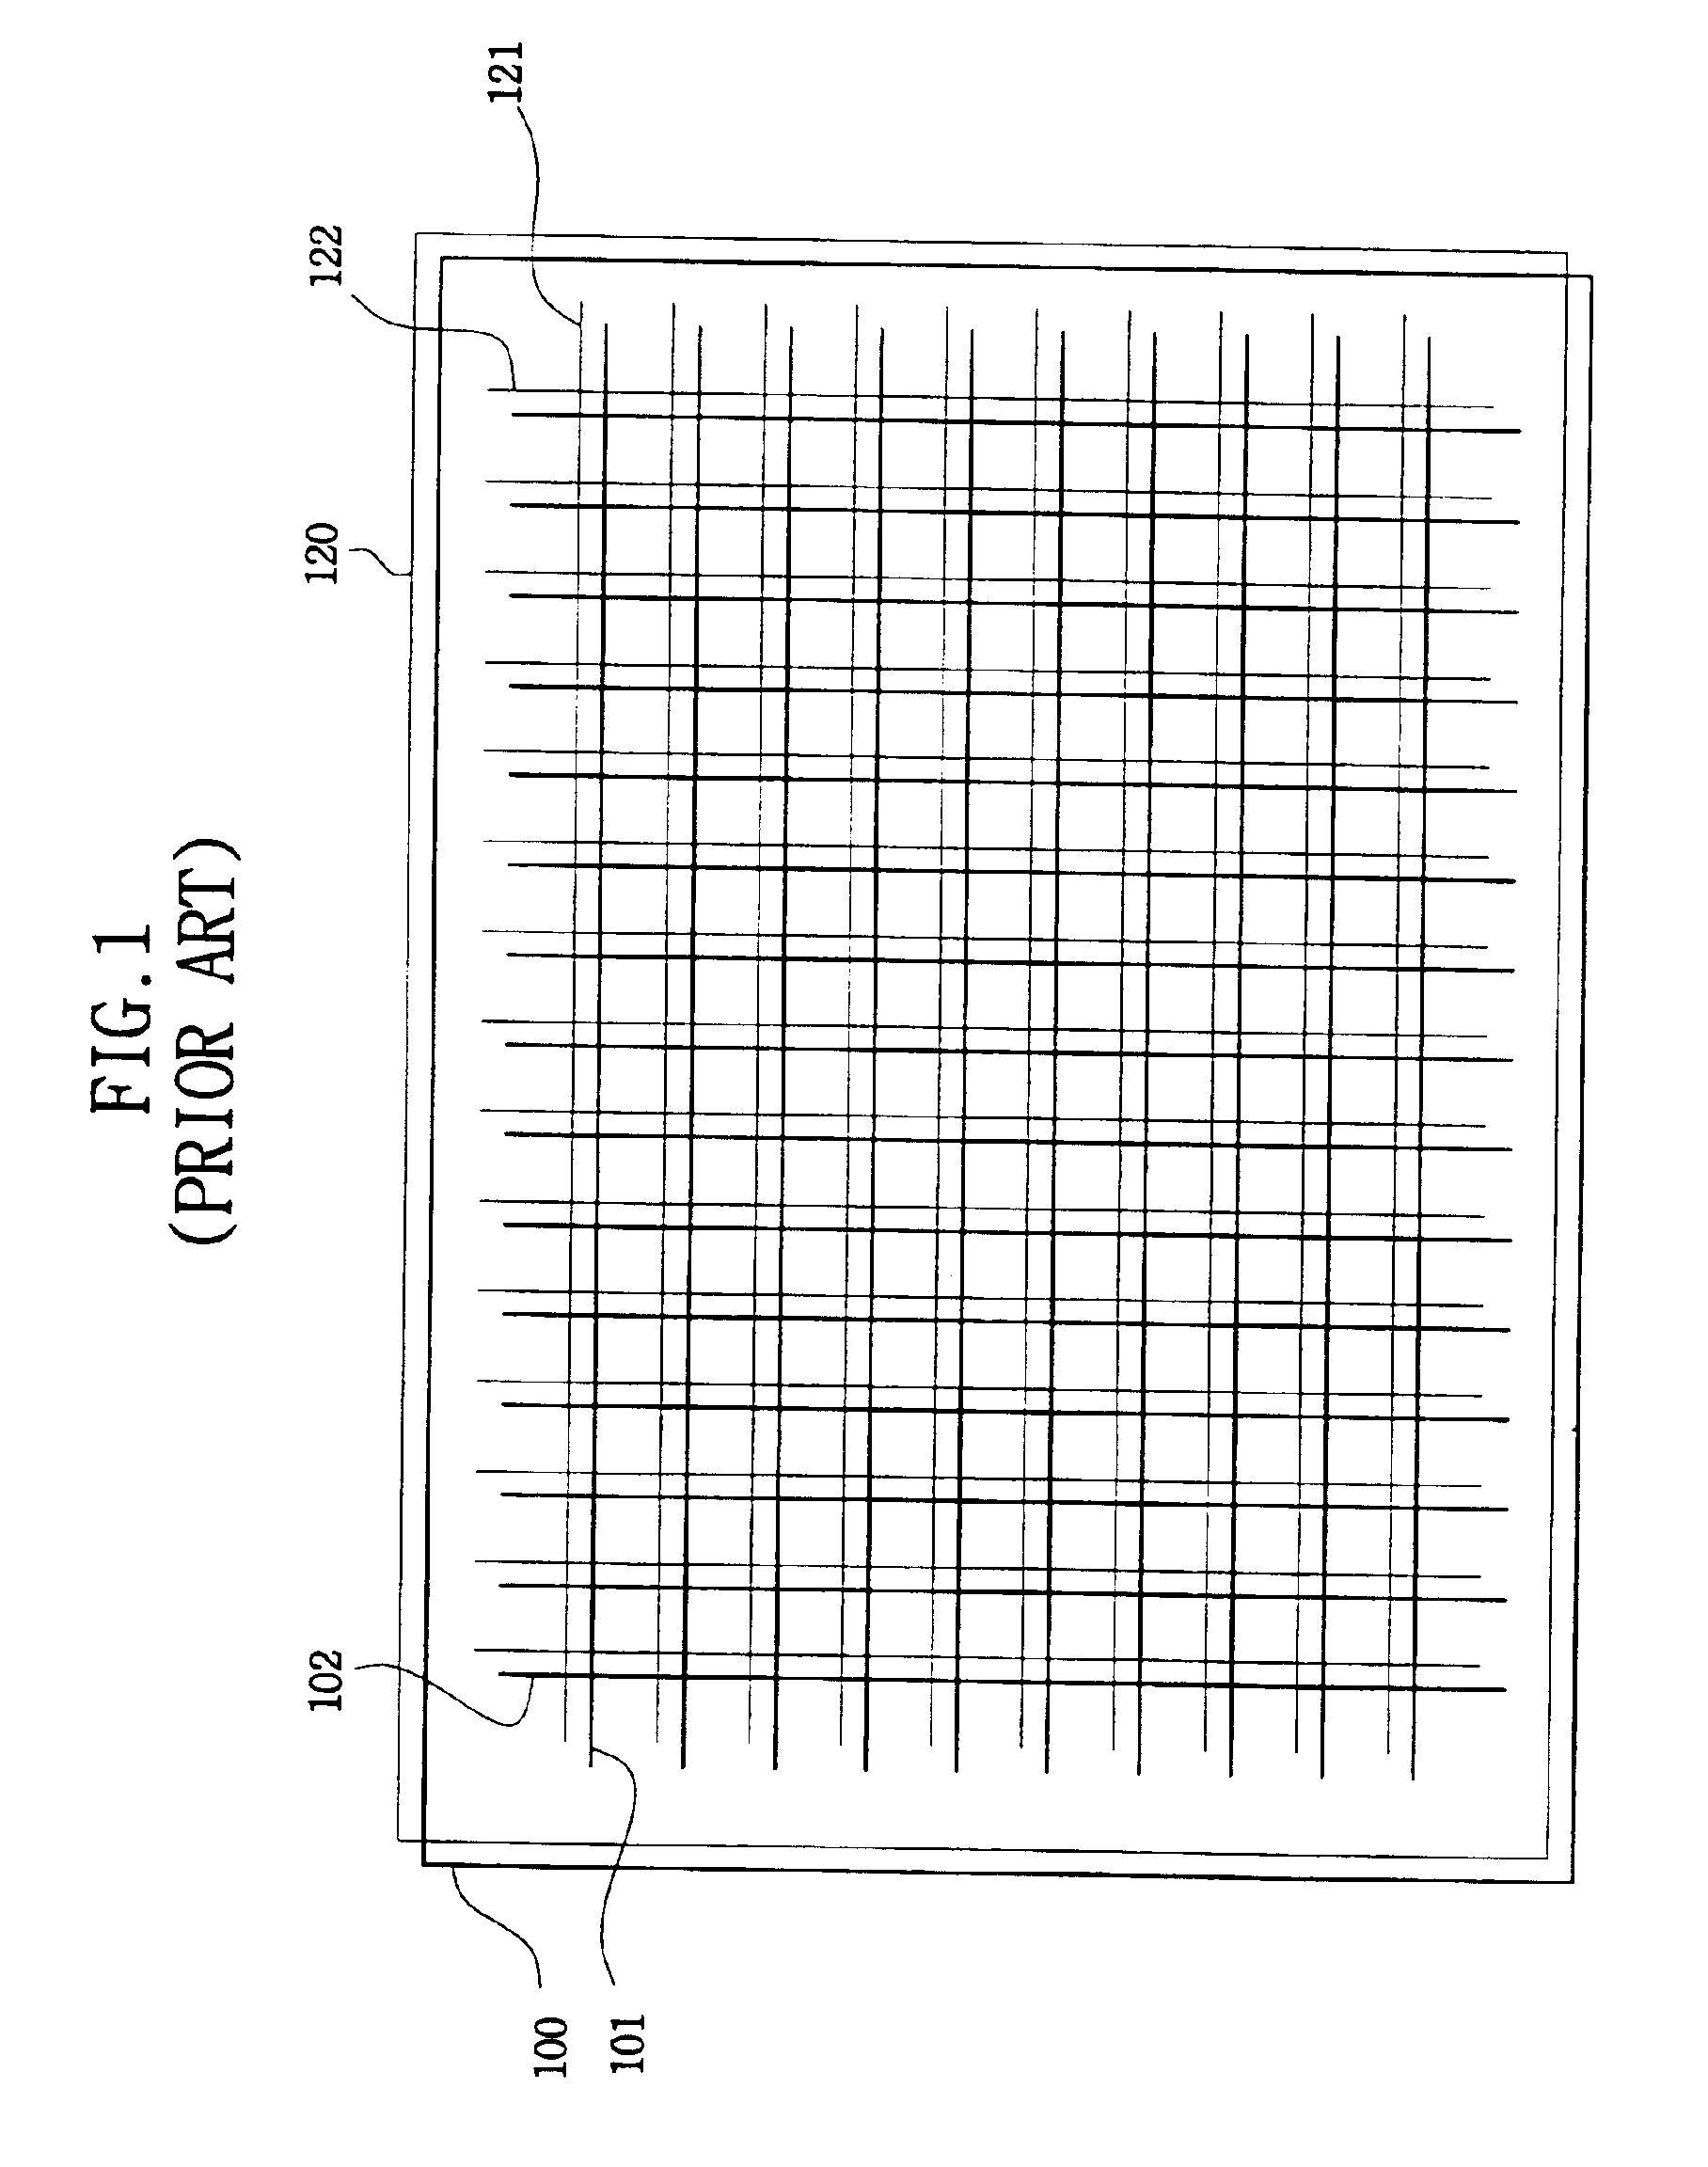 Image recognition device and liquid crystal display apparatus having the same